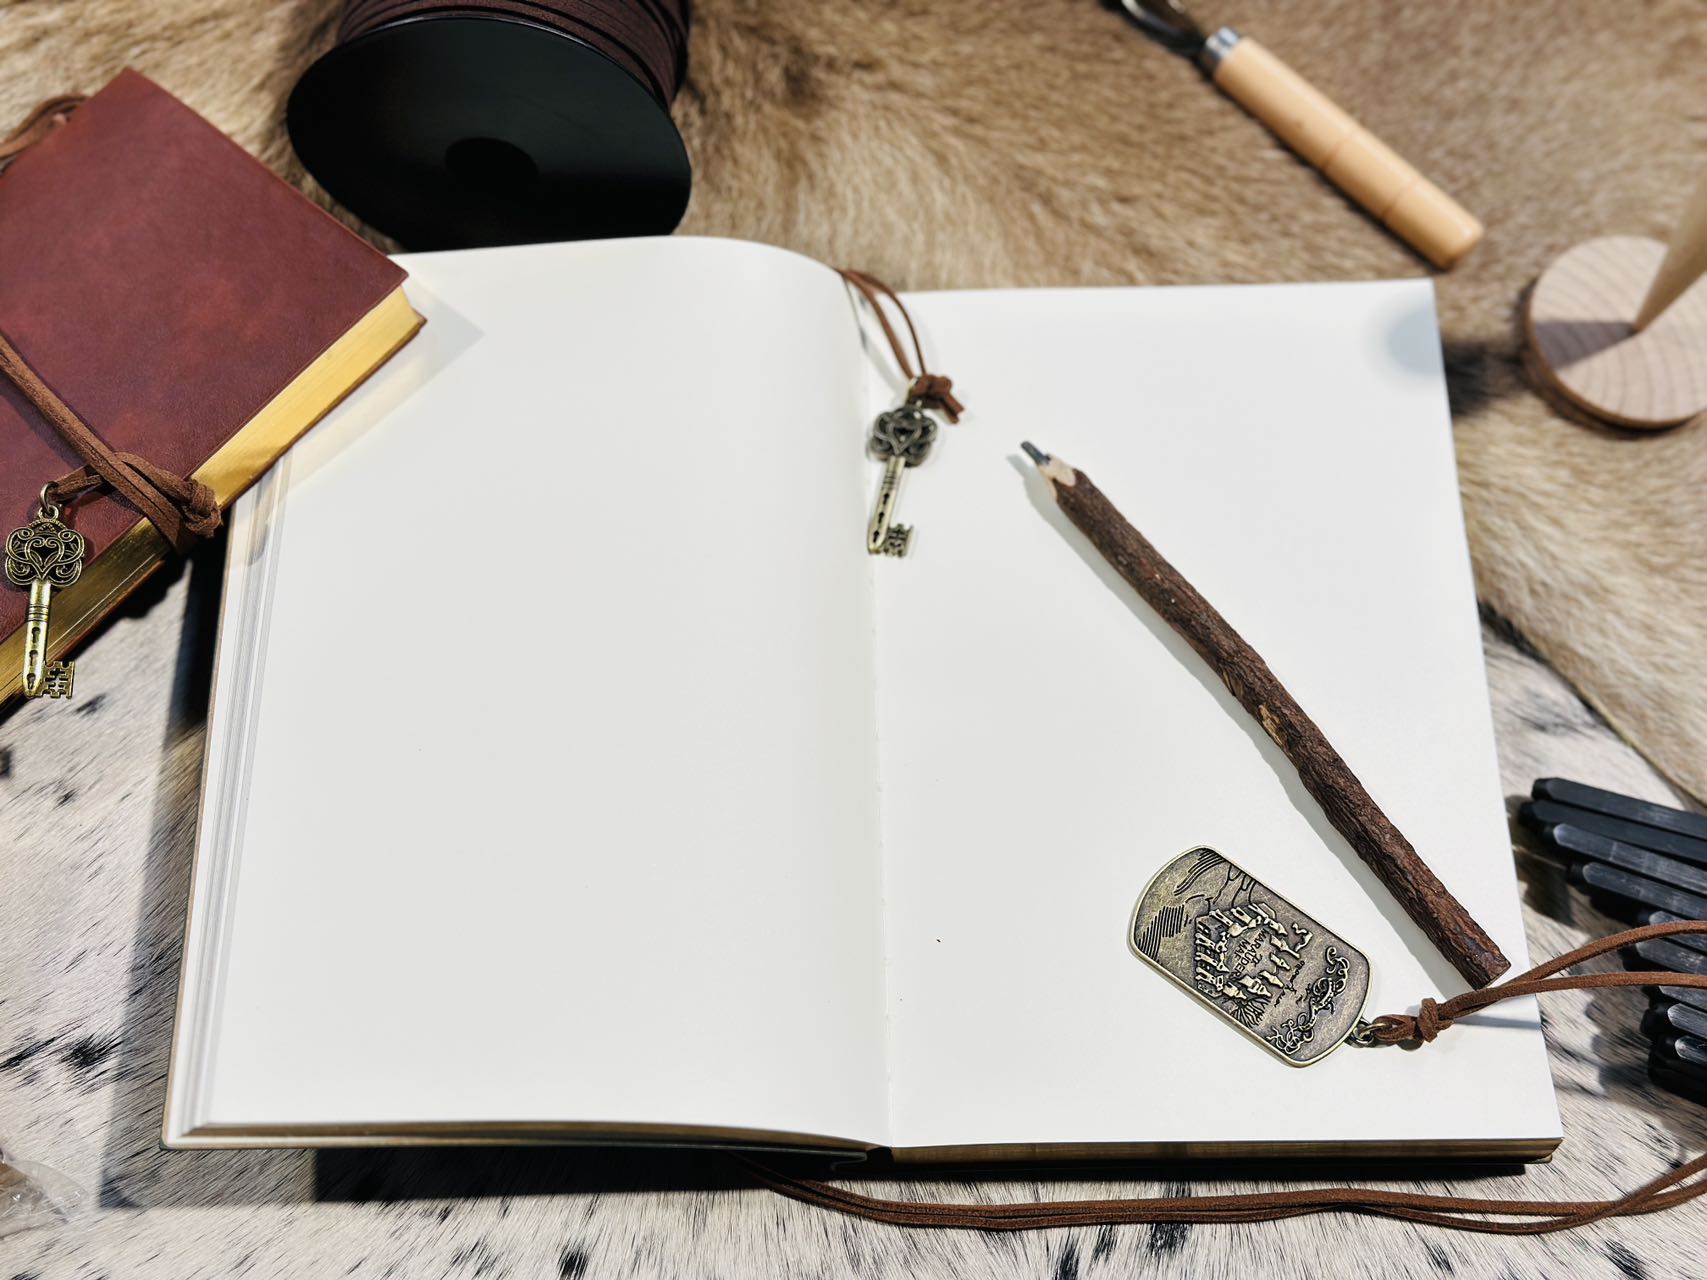 Small Vegan Leather Bound Journal with Enchanting Butterfly Girl Design – Elegance Meets Ethical Luxury